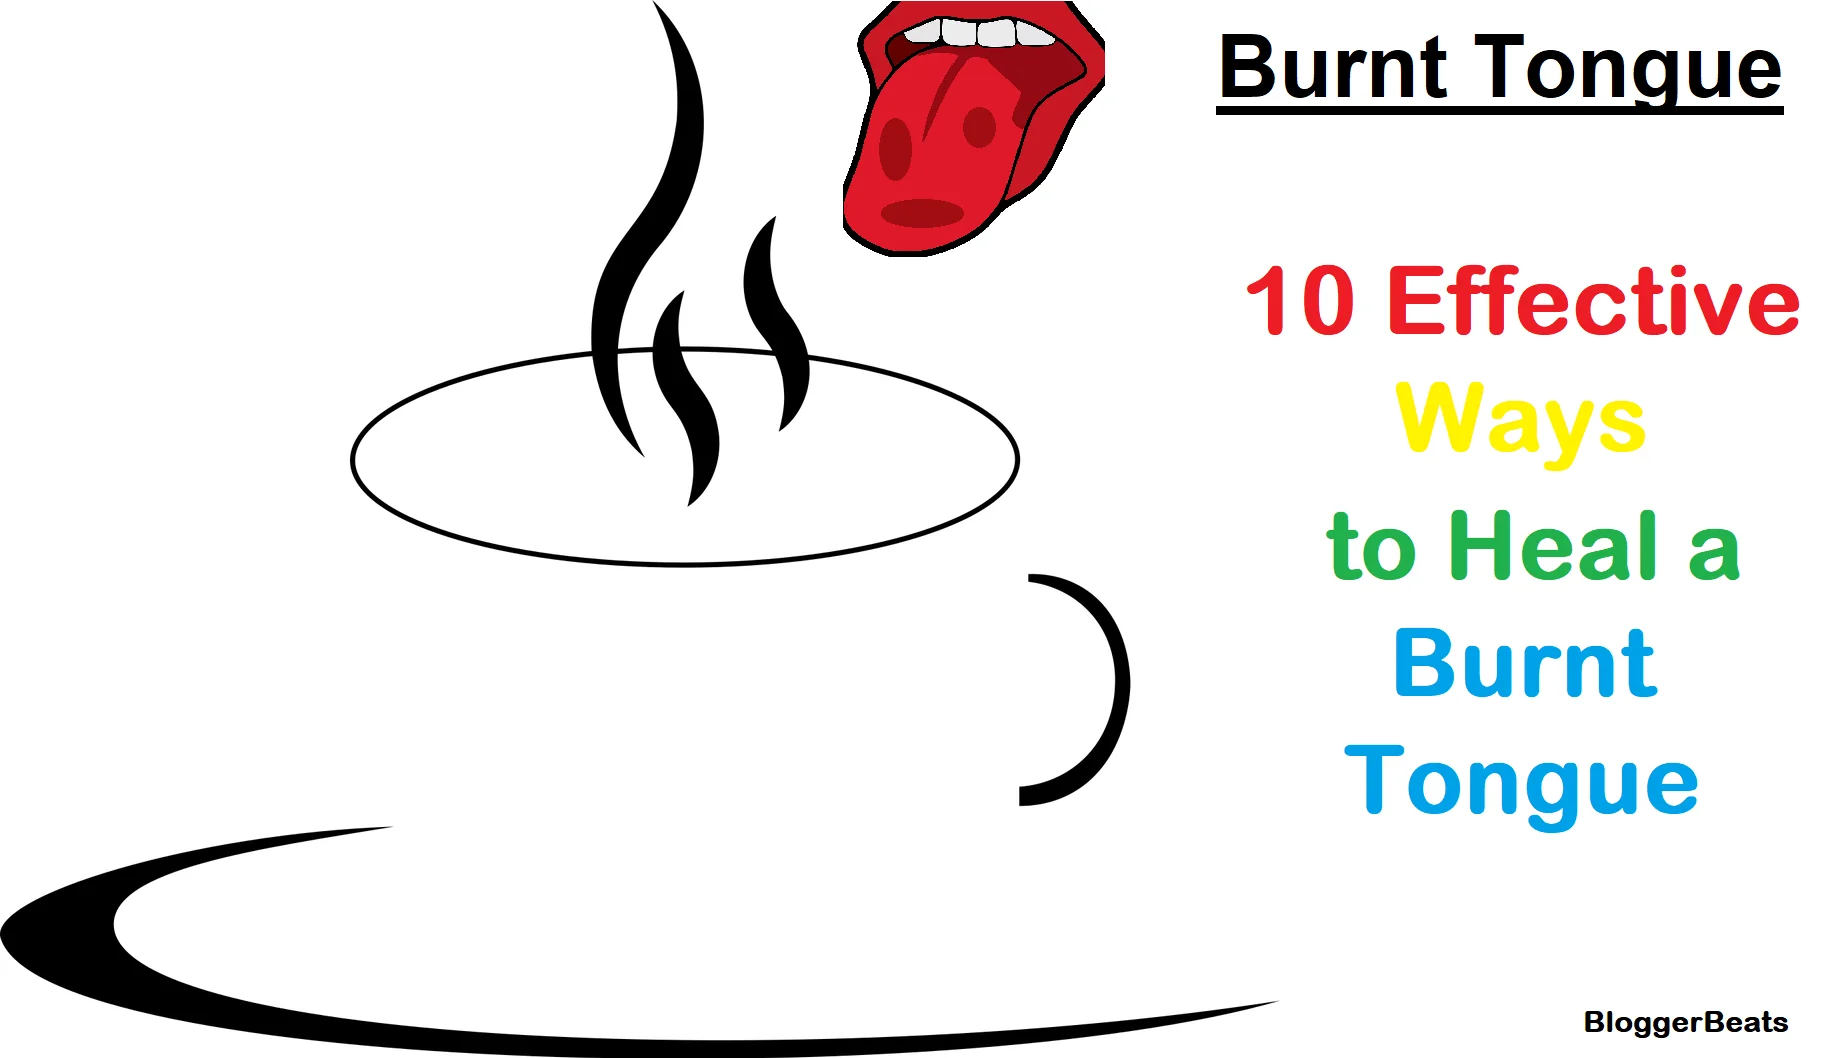 10 Effective Ways to Heal a Burnt Tongue